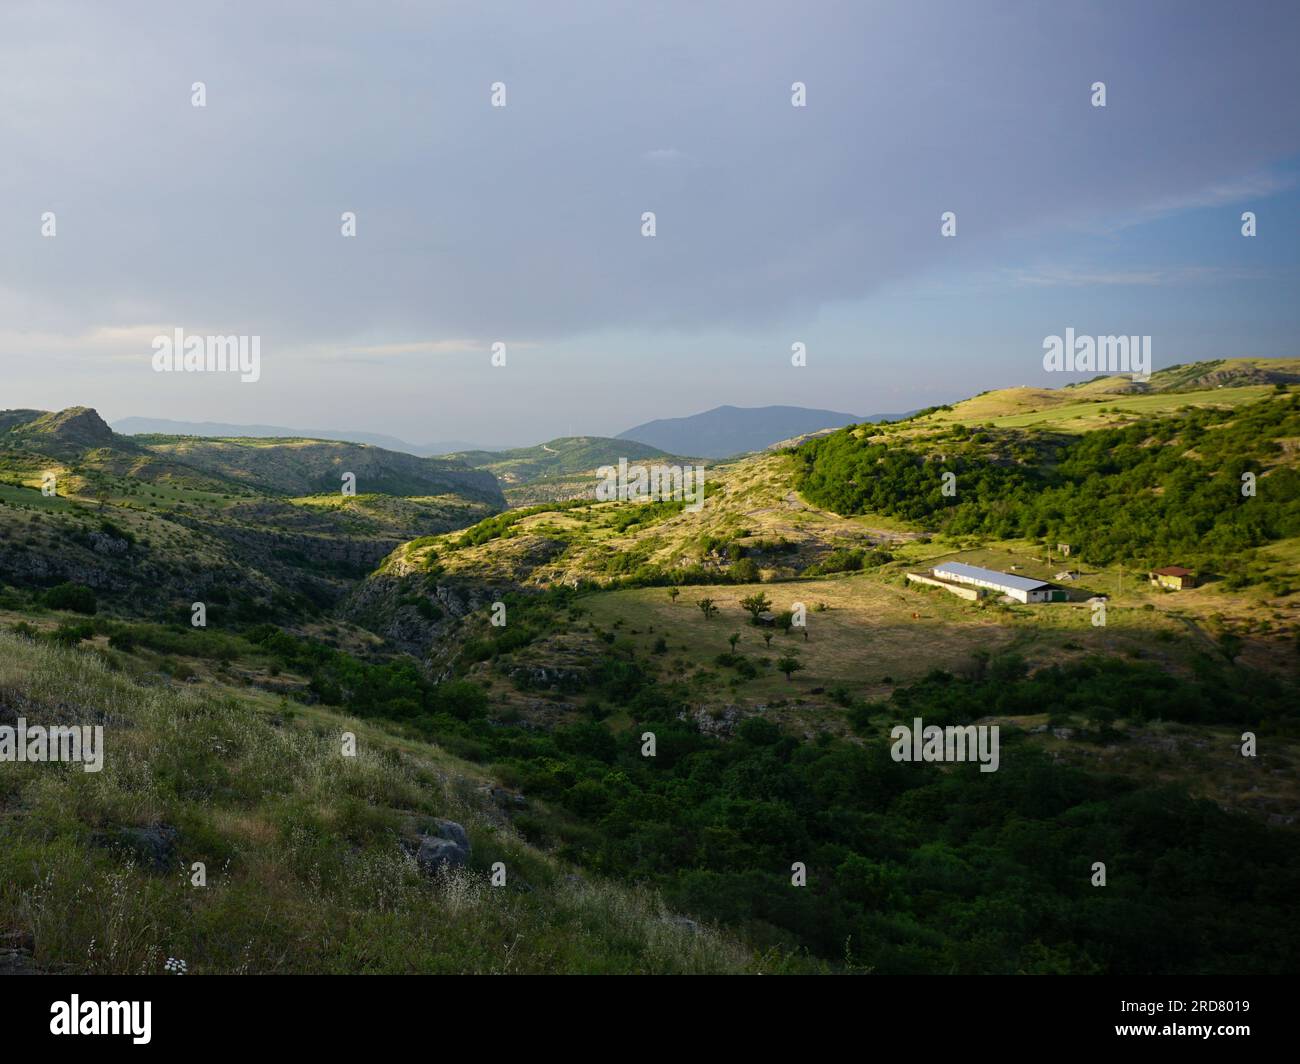 General view of mountains in the town of Shusha, Nagorno-Karabakh. The unrecognised yet de facto independent country in South Caucasus, Nagorno-Karabakh (also known as Artsakh) has been in the longest-running territorial dispute between Azerbaijan and Armenia in post-Soviet Eurasia since the collapse of Soviet Union. It is mainly populated by ethnic Armenians. Stock Photo